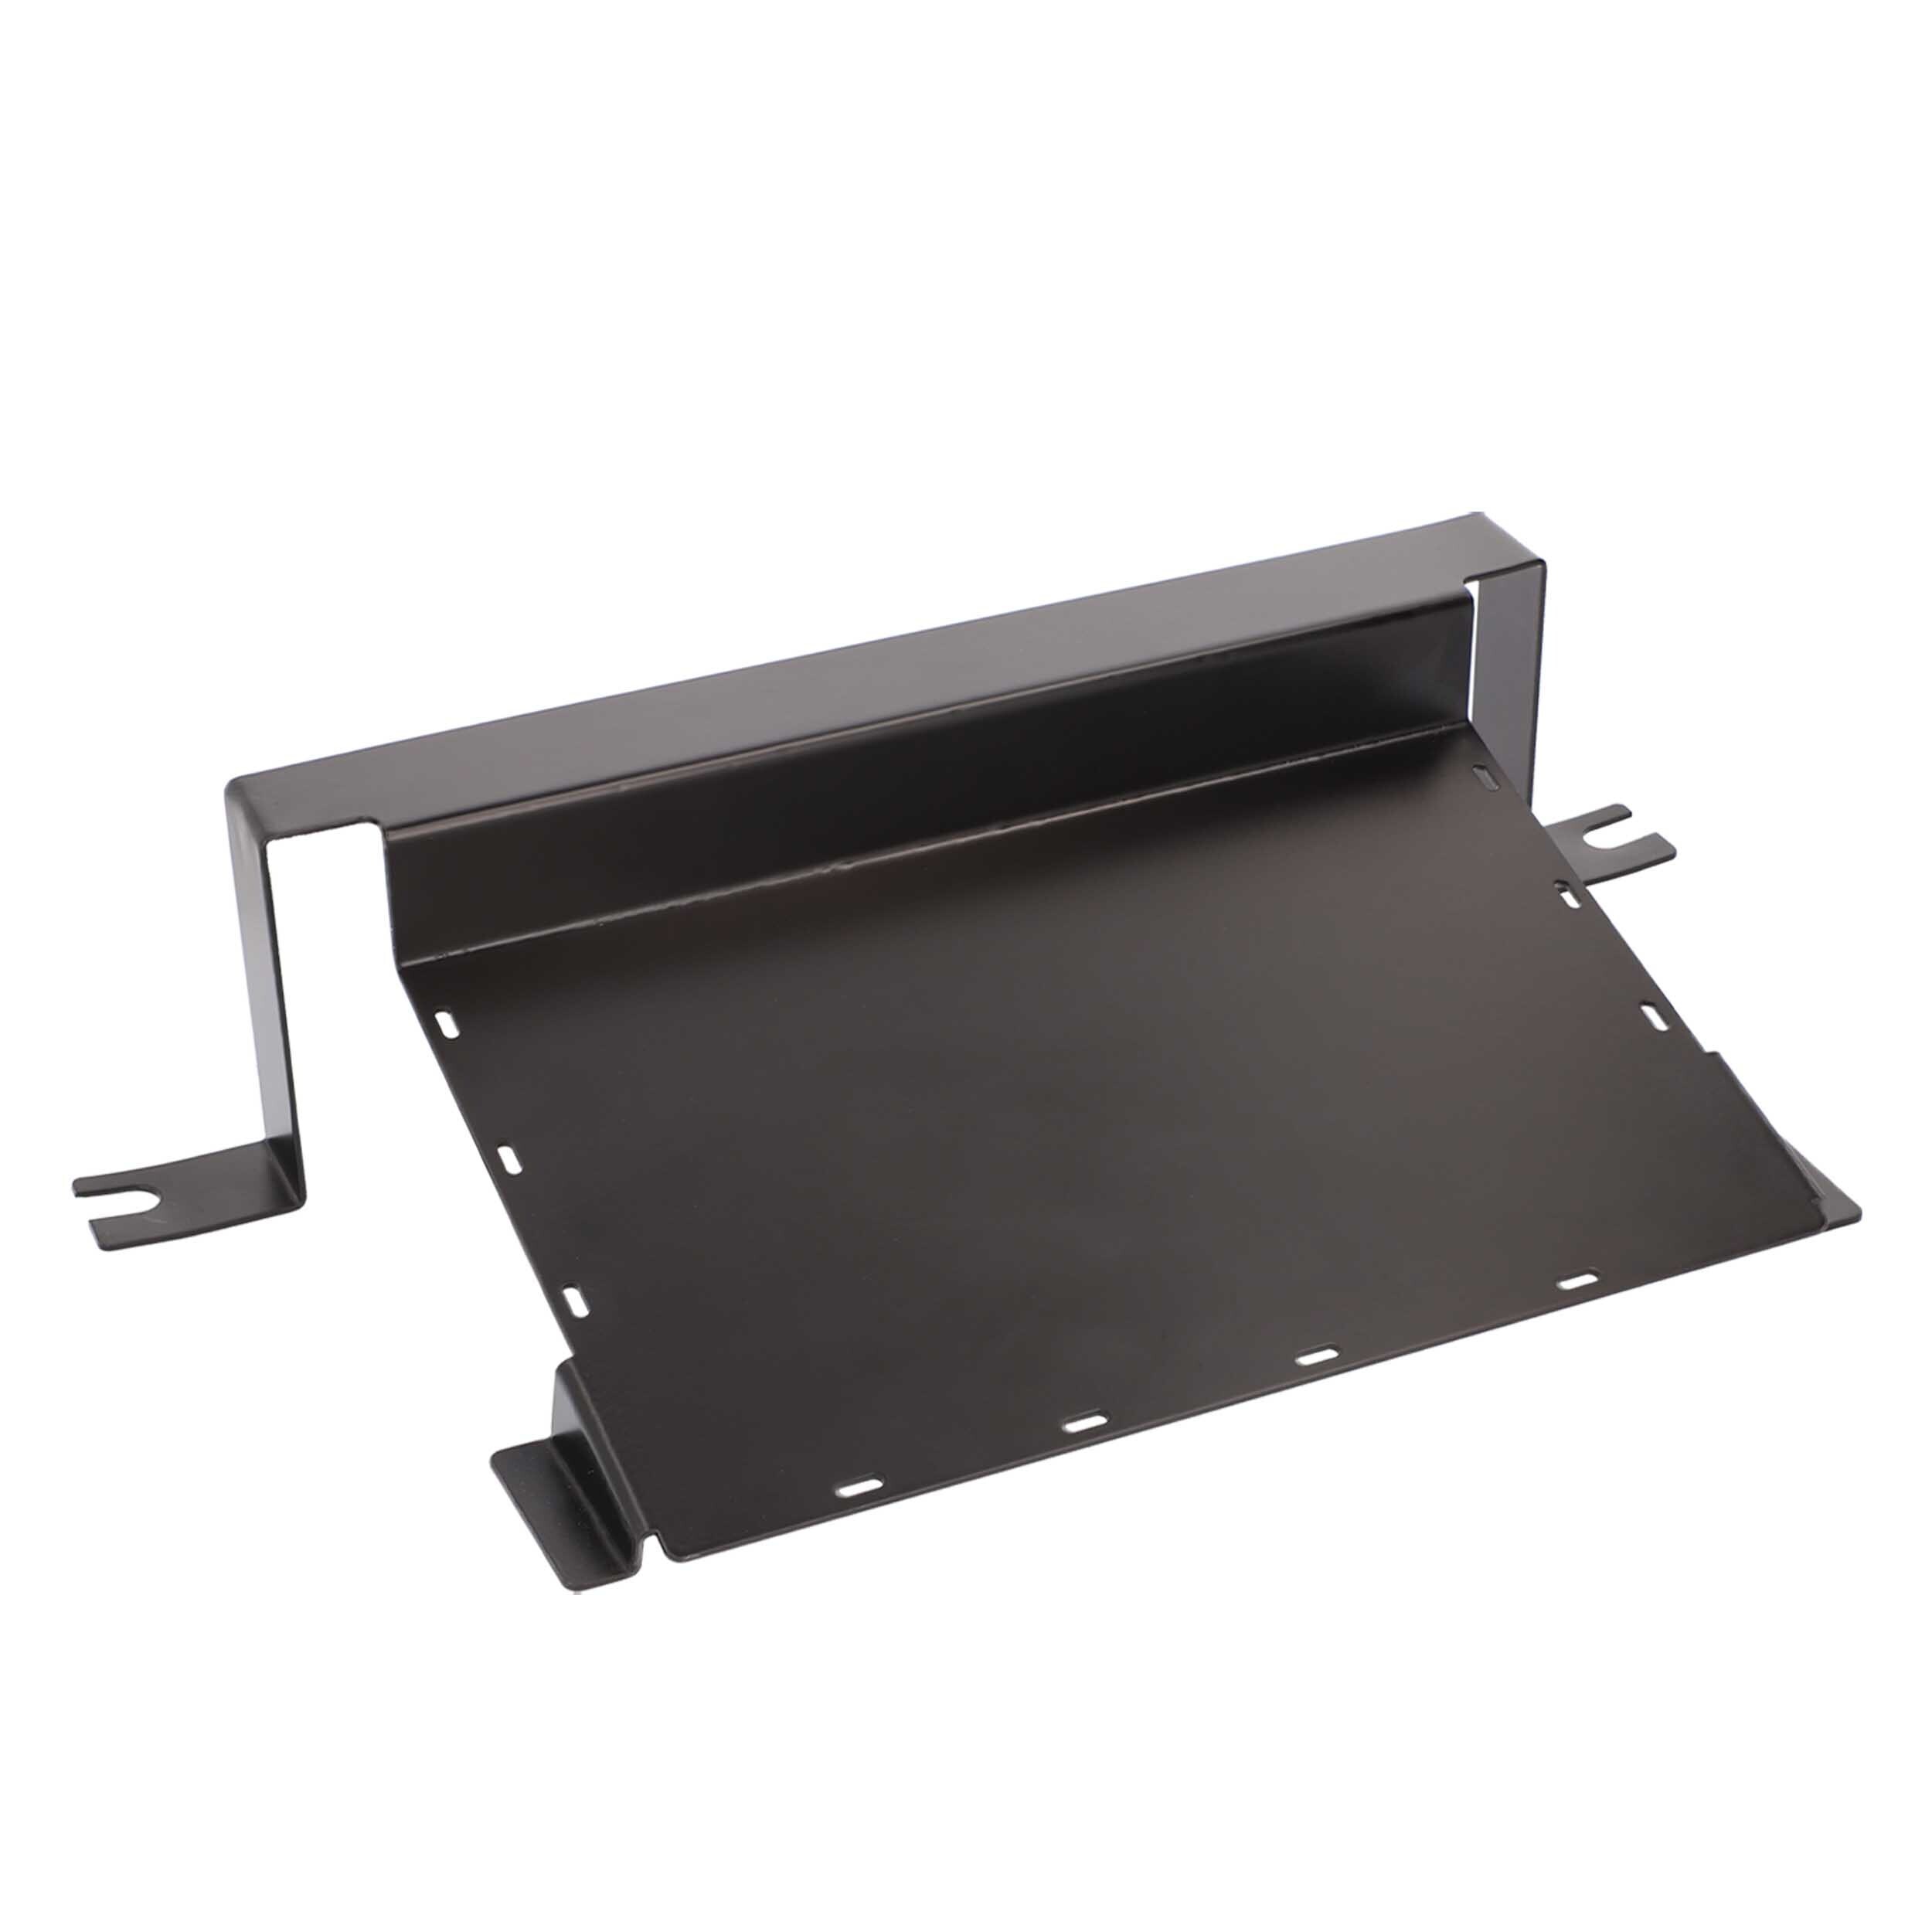 Under Seat Amp Rack - Fits select Jeeps®